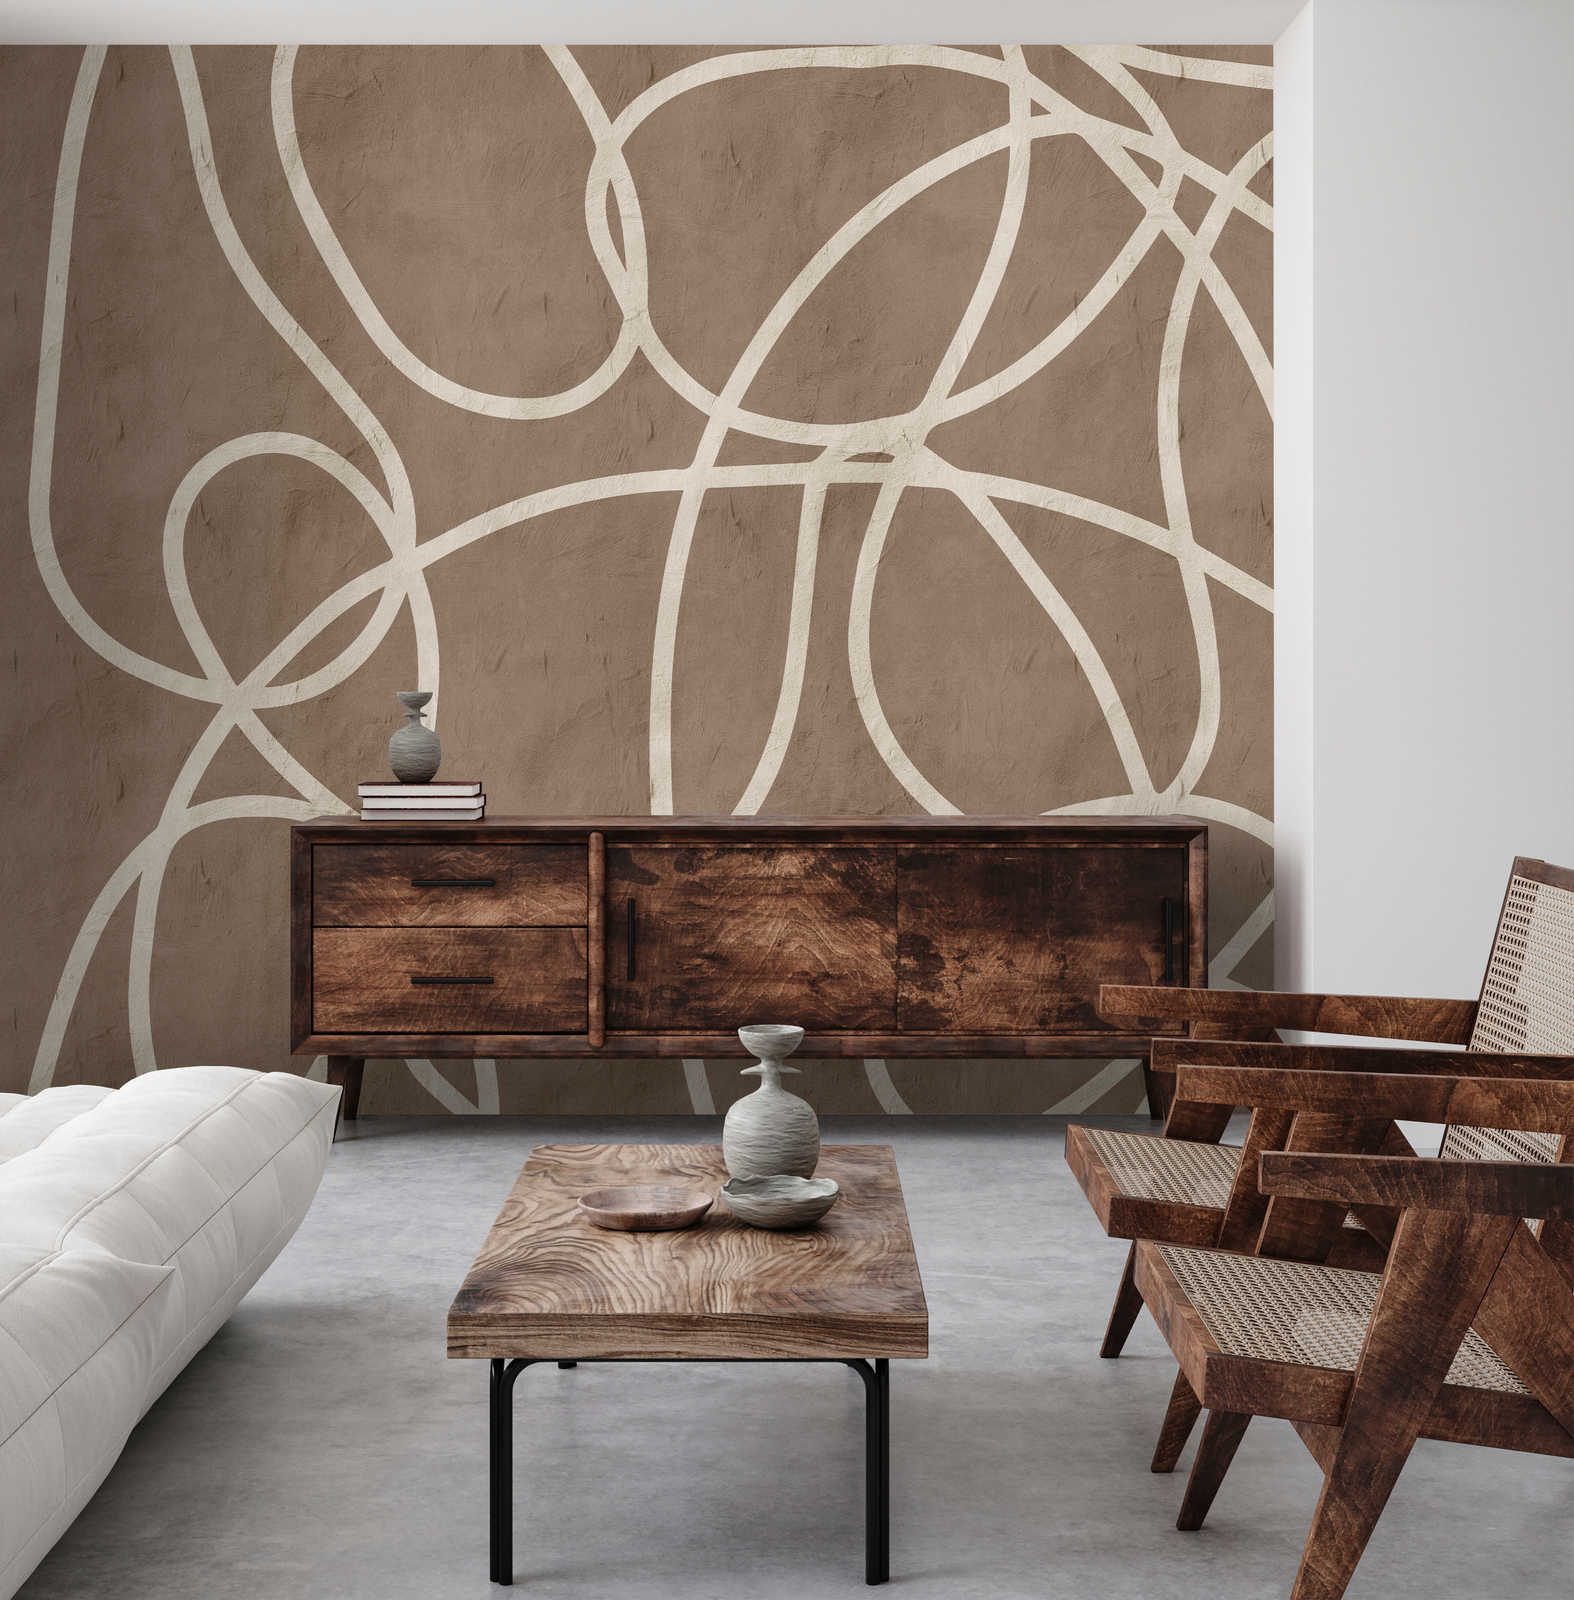             Serengeti 3 - mural brown beige clay wall with lines design
        